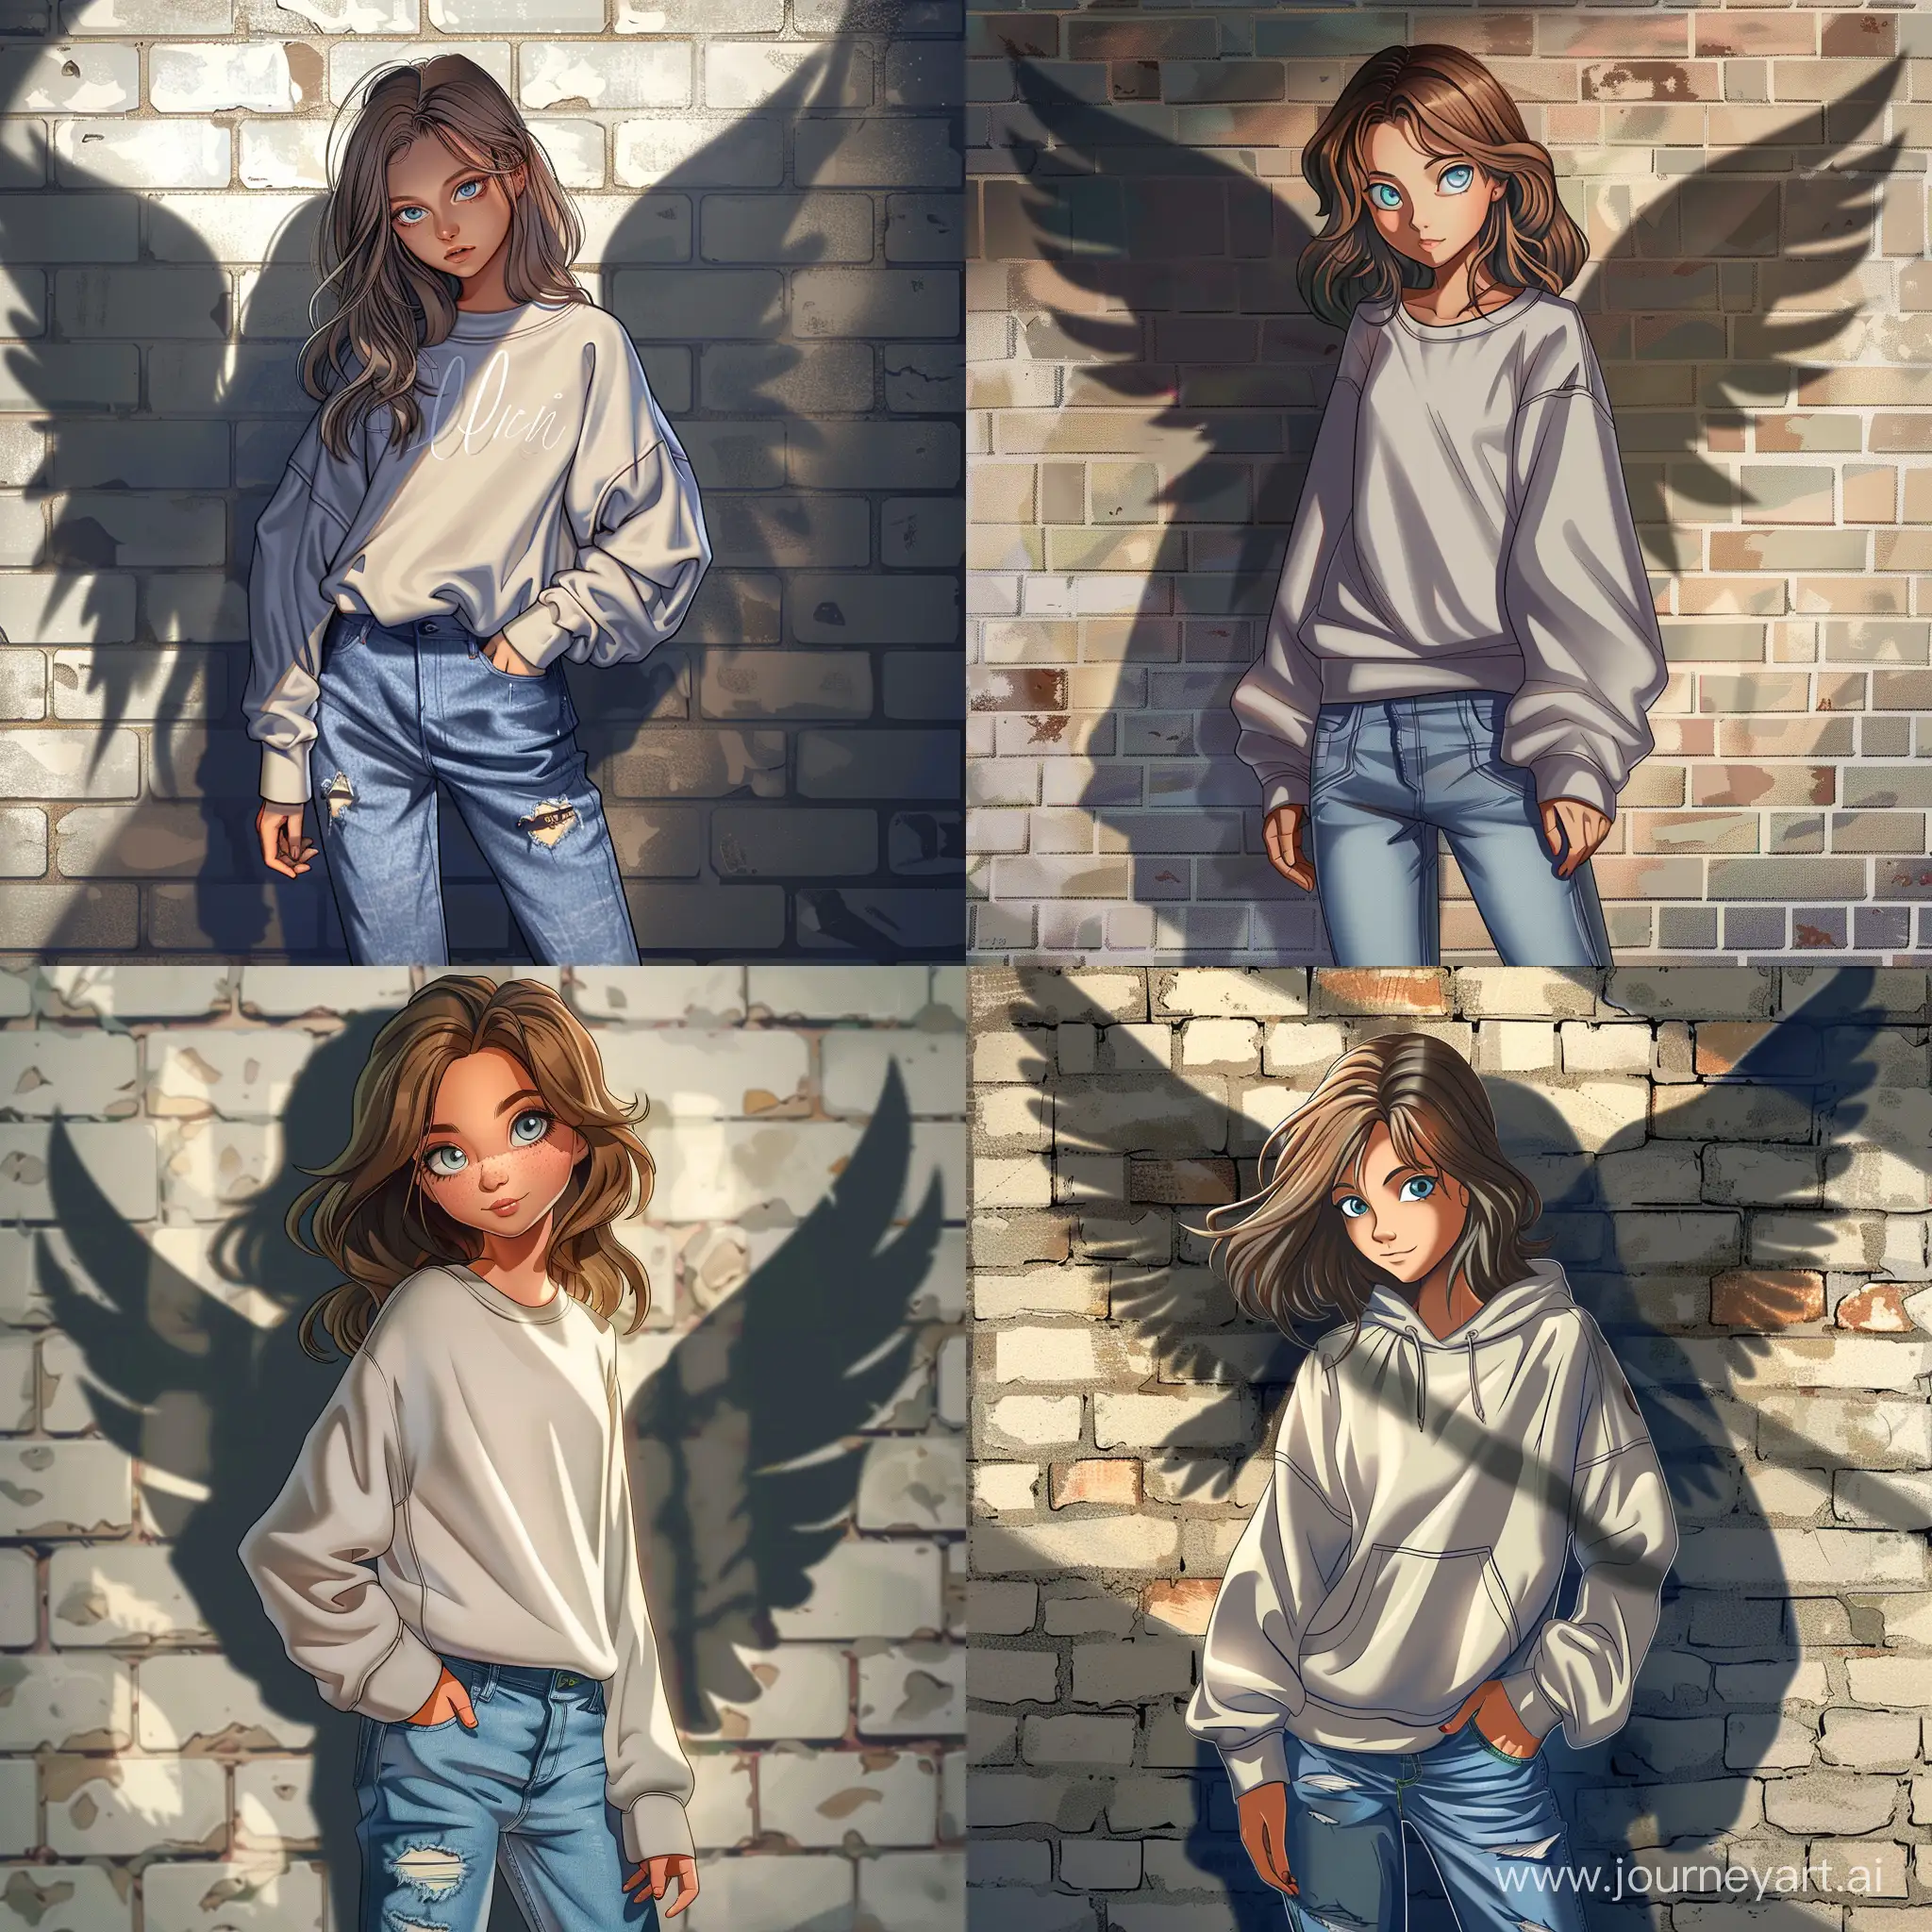 Beautiful girl, brown hair, gray-blue eyes, white skin, teenager, 15 years old, jeans and oversize sweatshirt, shadow of wings on the brick wall behind, high quality, high detail, cartoon art